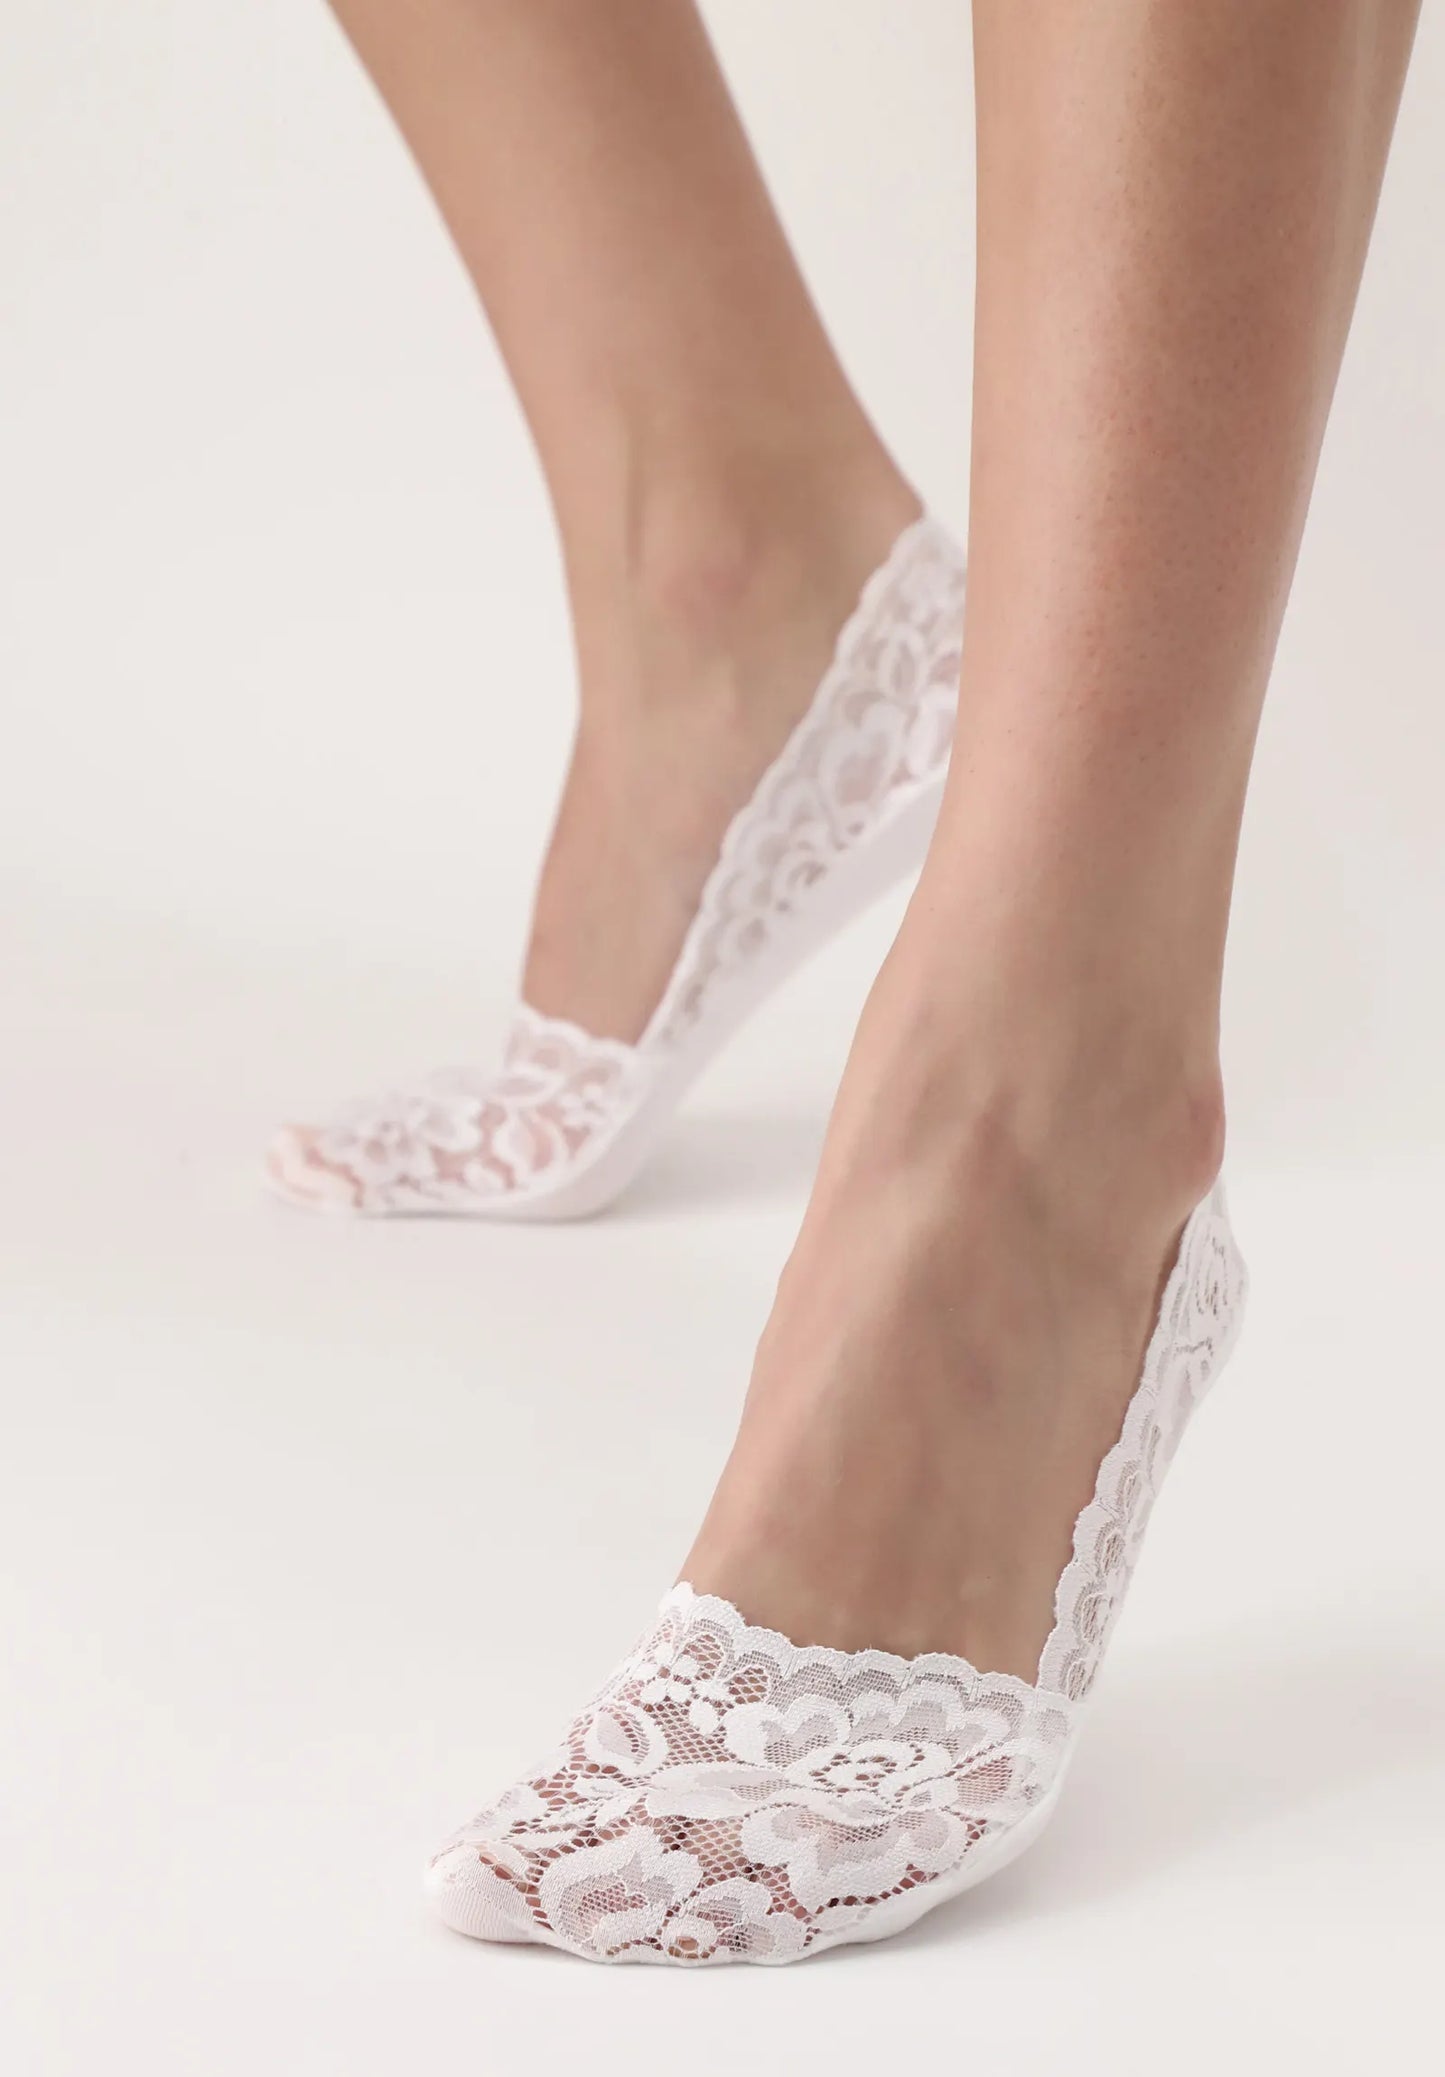 Oroblù Lacy No Show Socks - White floral lace invisible sock made of soft lace with breathable cotton sole and non-slip silicone grip on the heel.